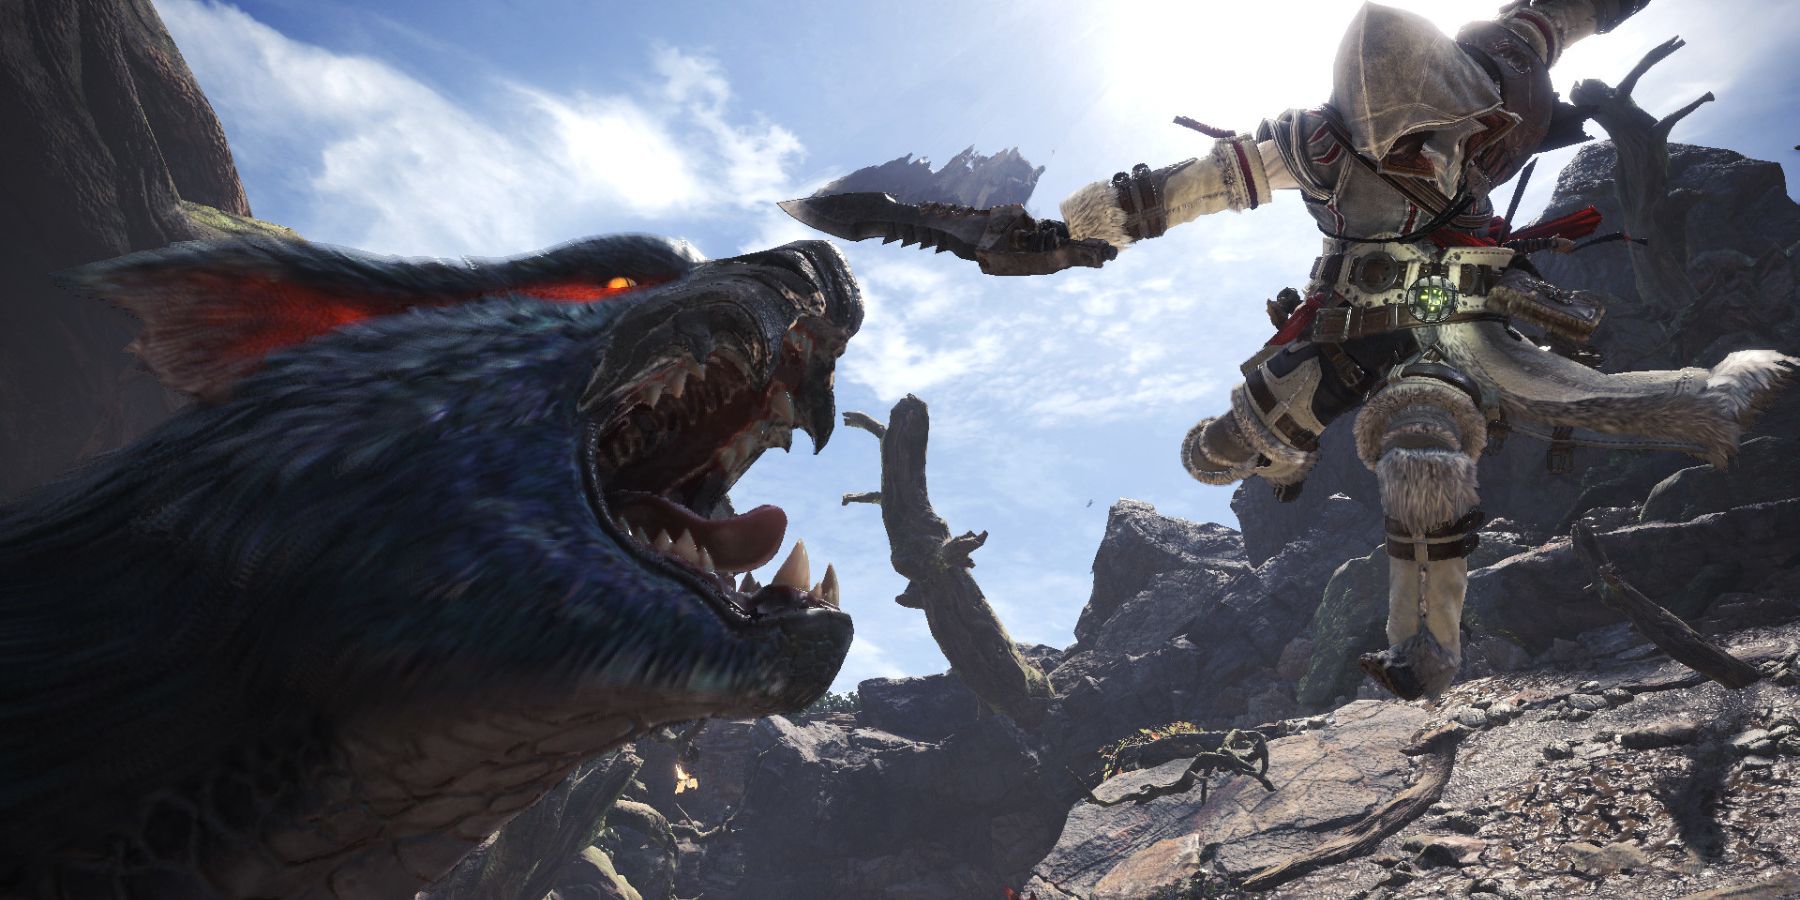 gamerant.com - Monster Hunter World: Iceborne is going to be losing content...